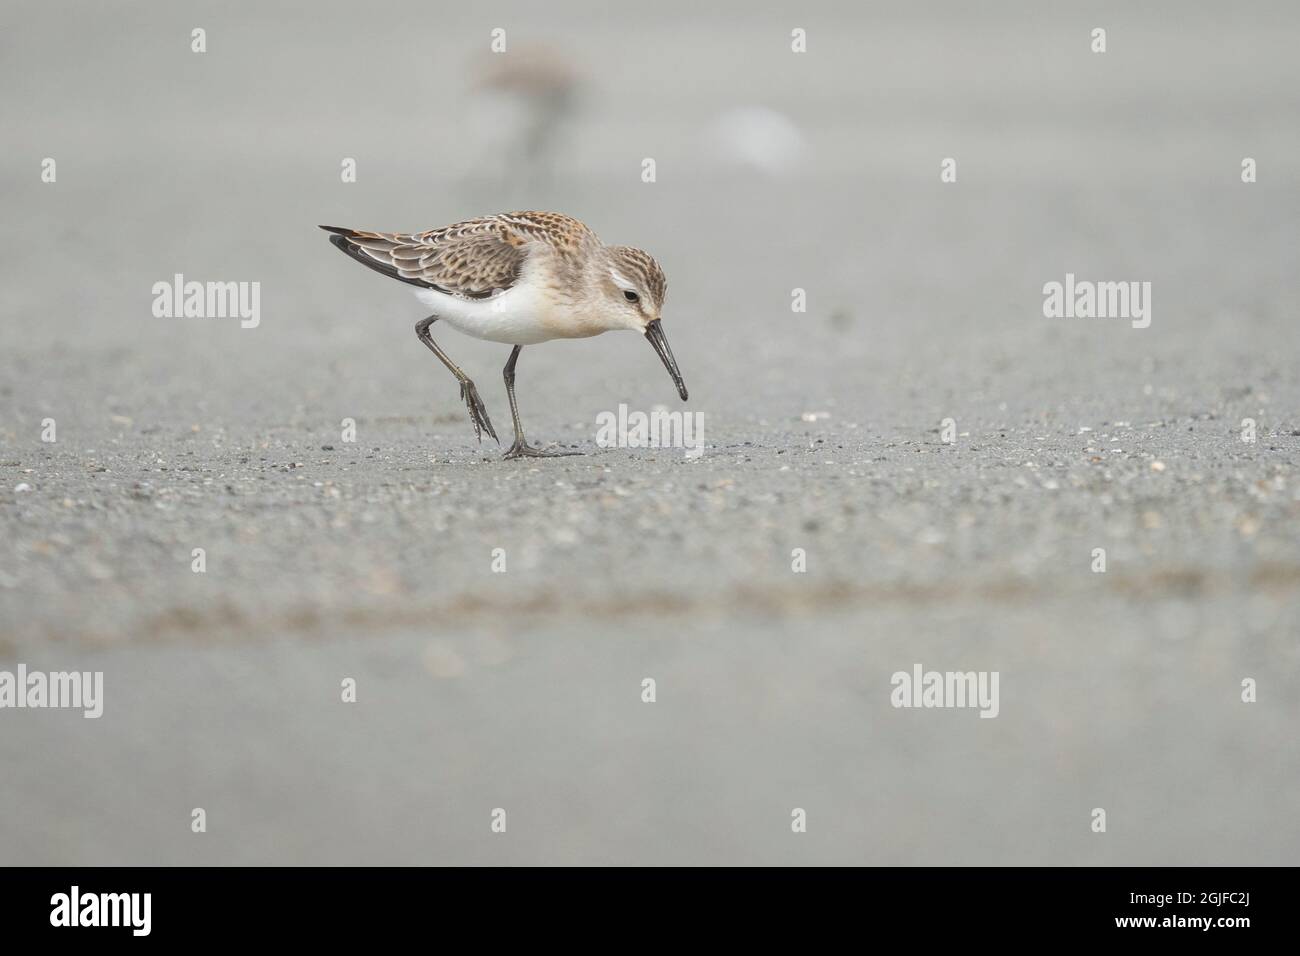 USA, Washington State. A Western Sandpiper (Calidris mauri) forages on a beach during fall migration. Makah Bay. Stock Photo